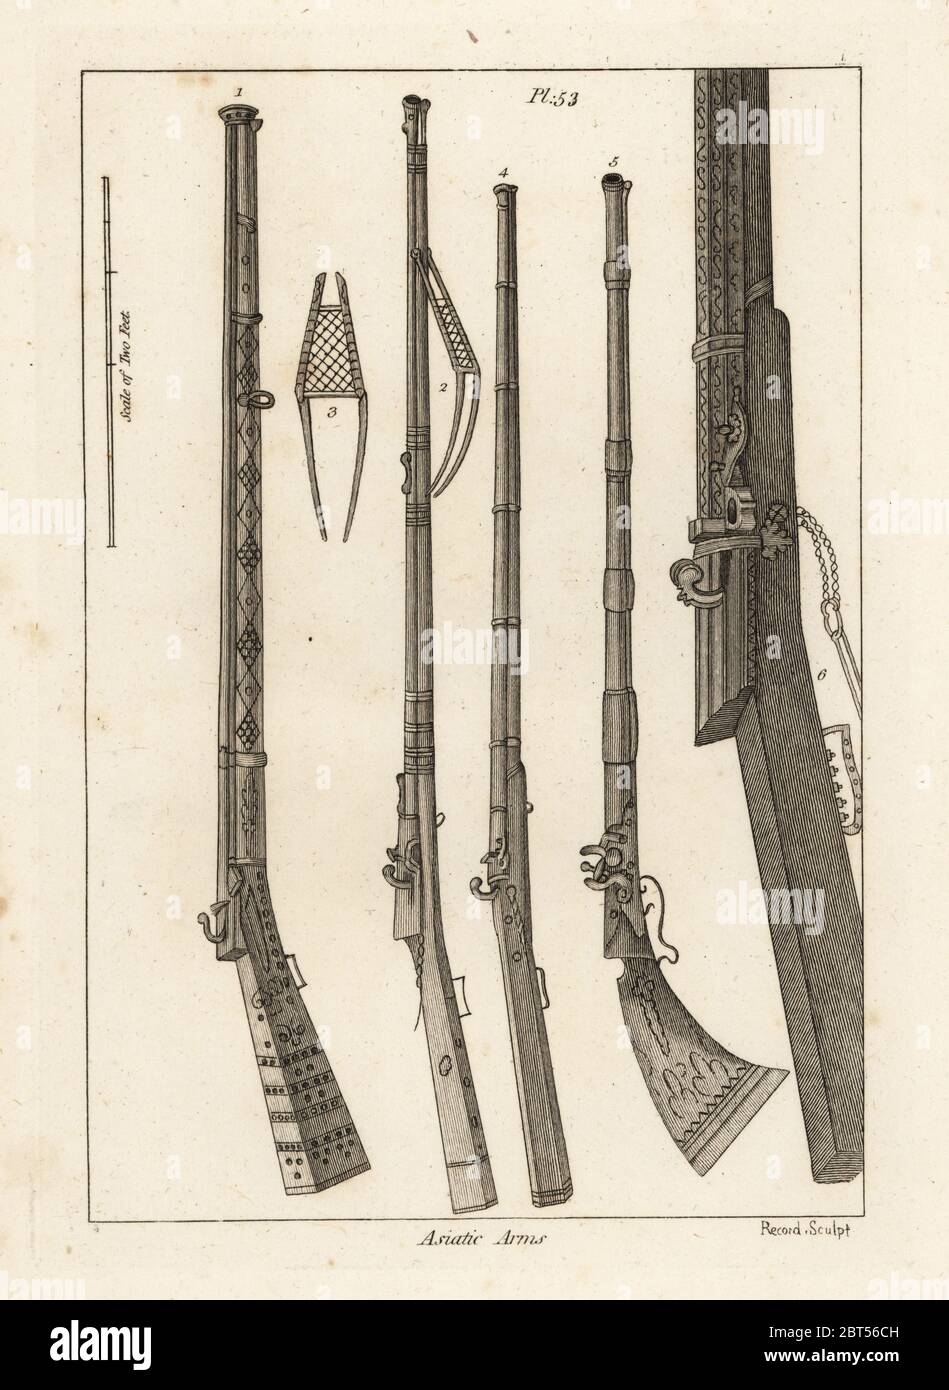 Asiatic arms. Asiatick matchlock guns 1,2, brazen apendage serving as a rest 3, Turkish guns 4,5 and Turkish matchlock gun enlarged. Copperplate engraving by Record from Francis Grose's Military Antiquities respecting a History of the English Army, Stockdale, London, 1812. Stock Photo